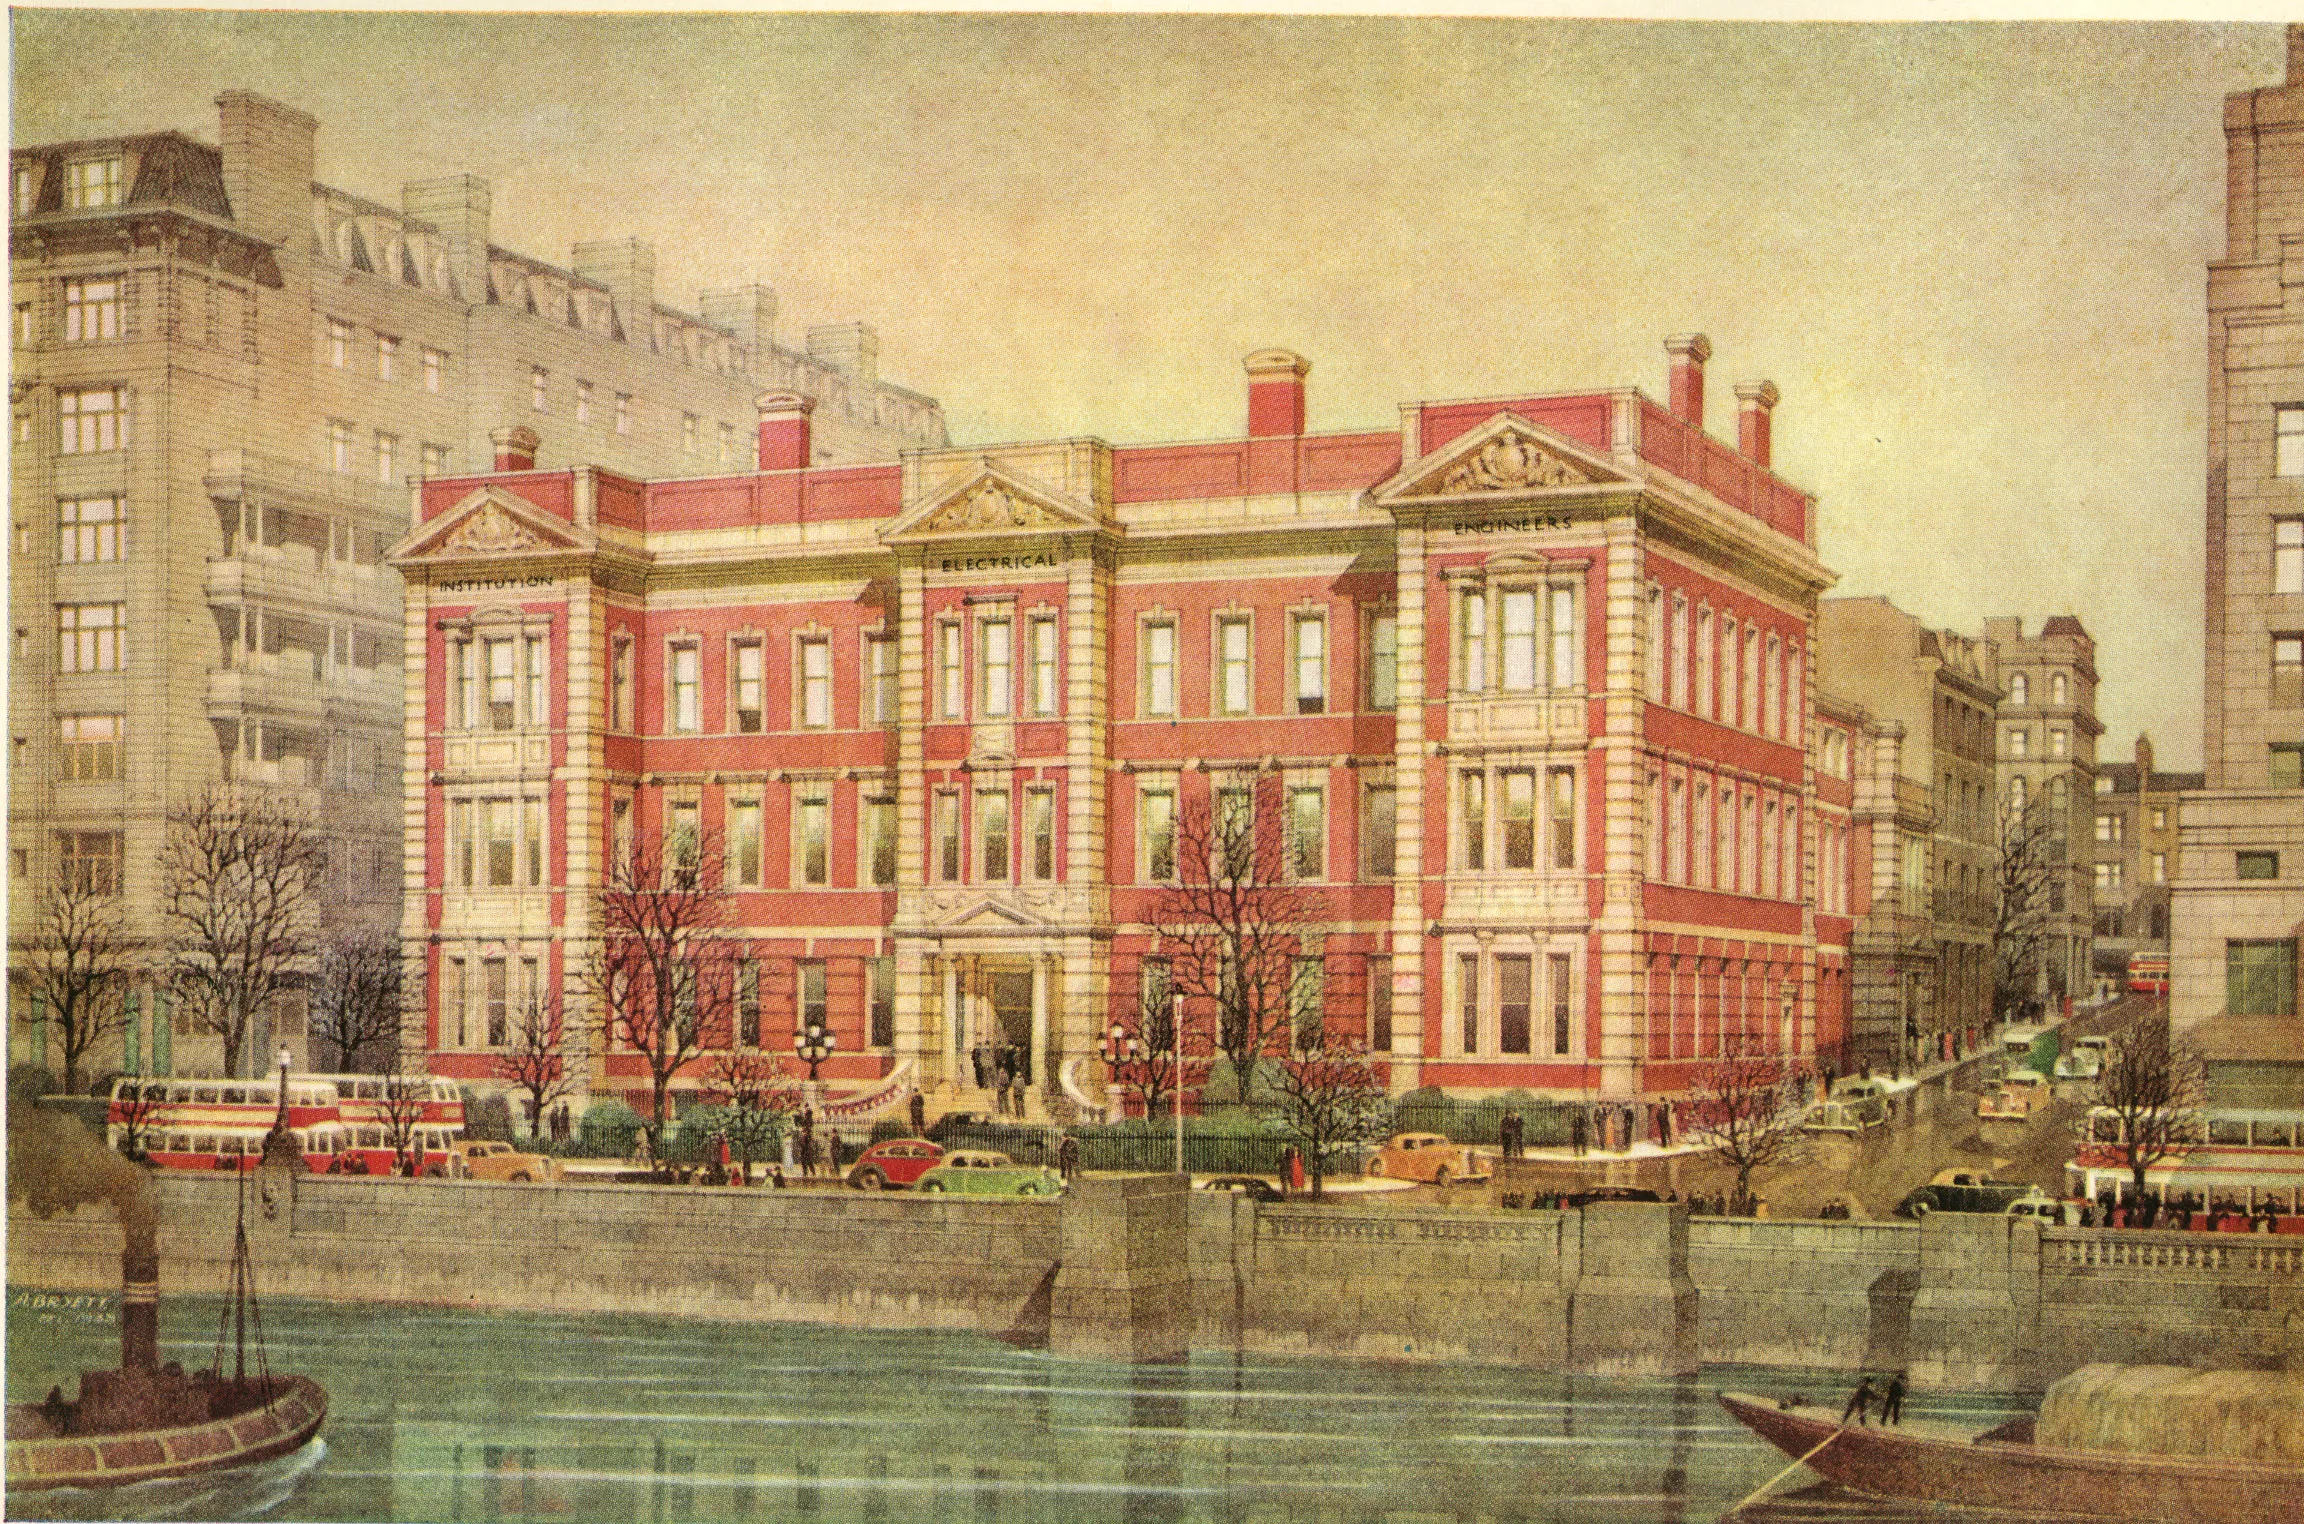 Painting of Savoy Place by A Bryett, 1939